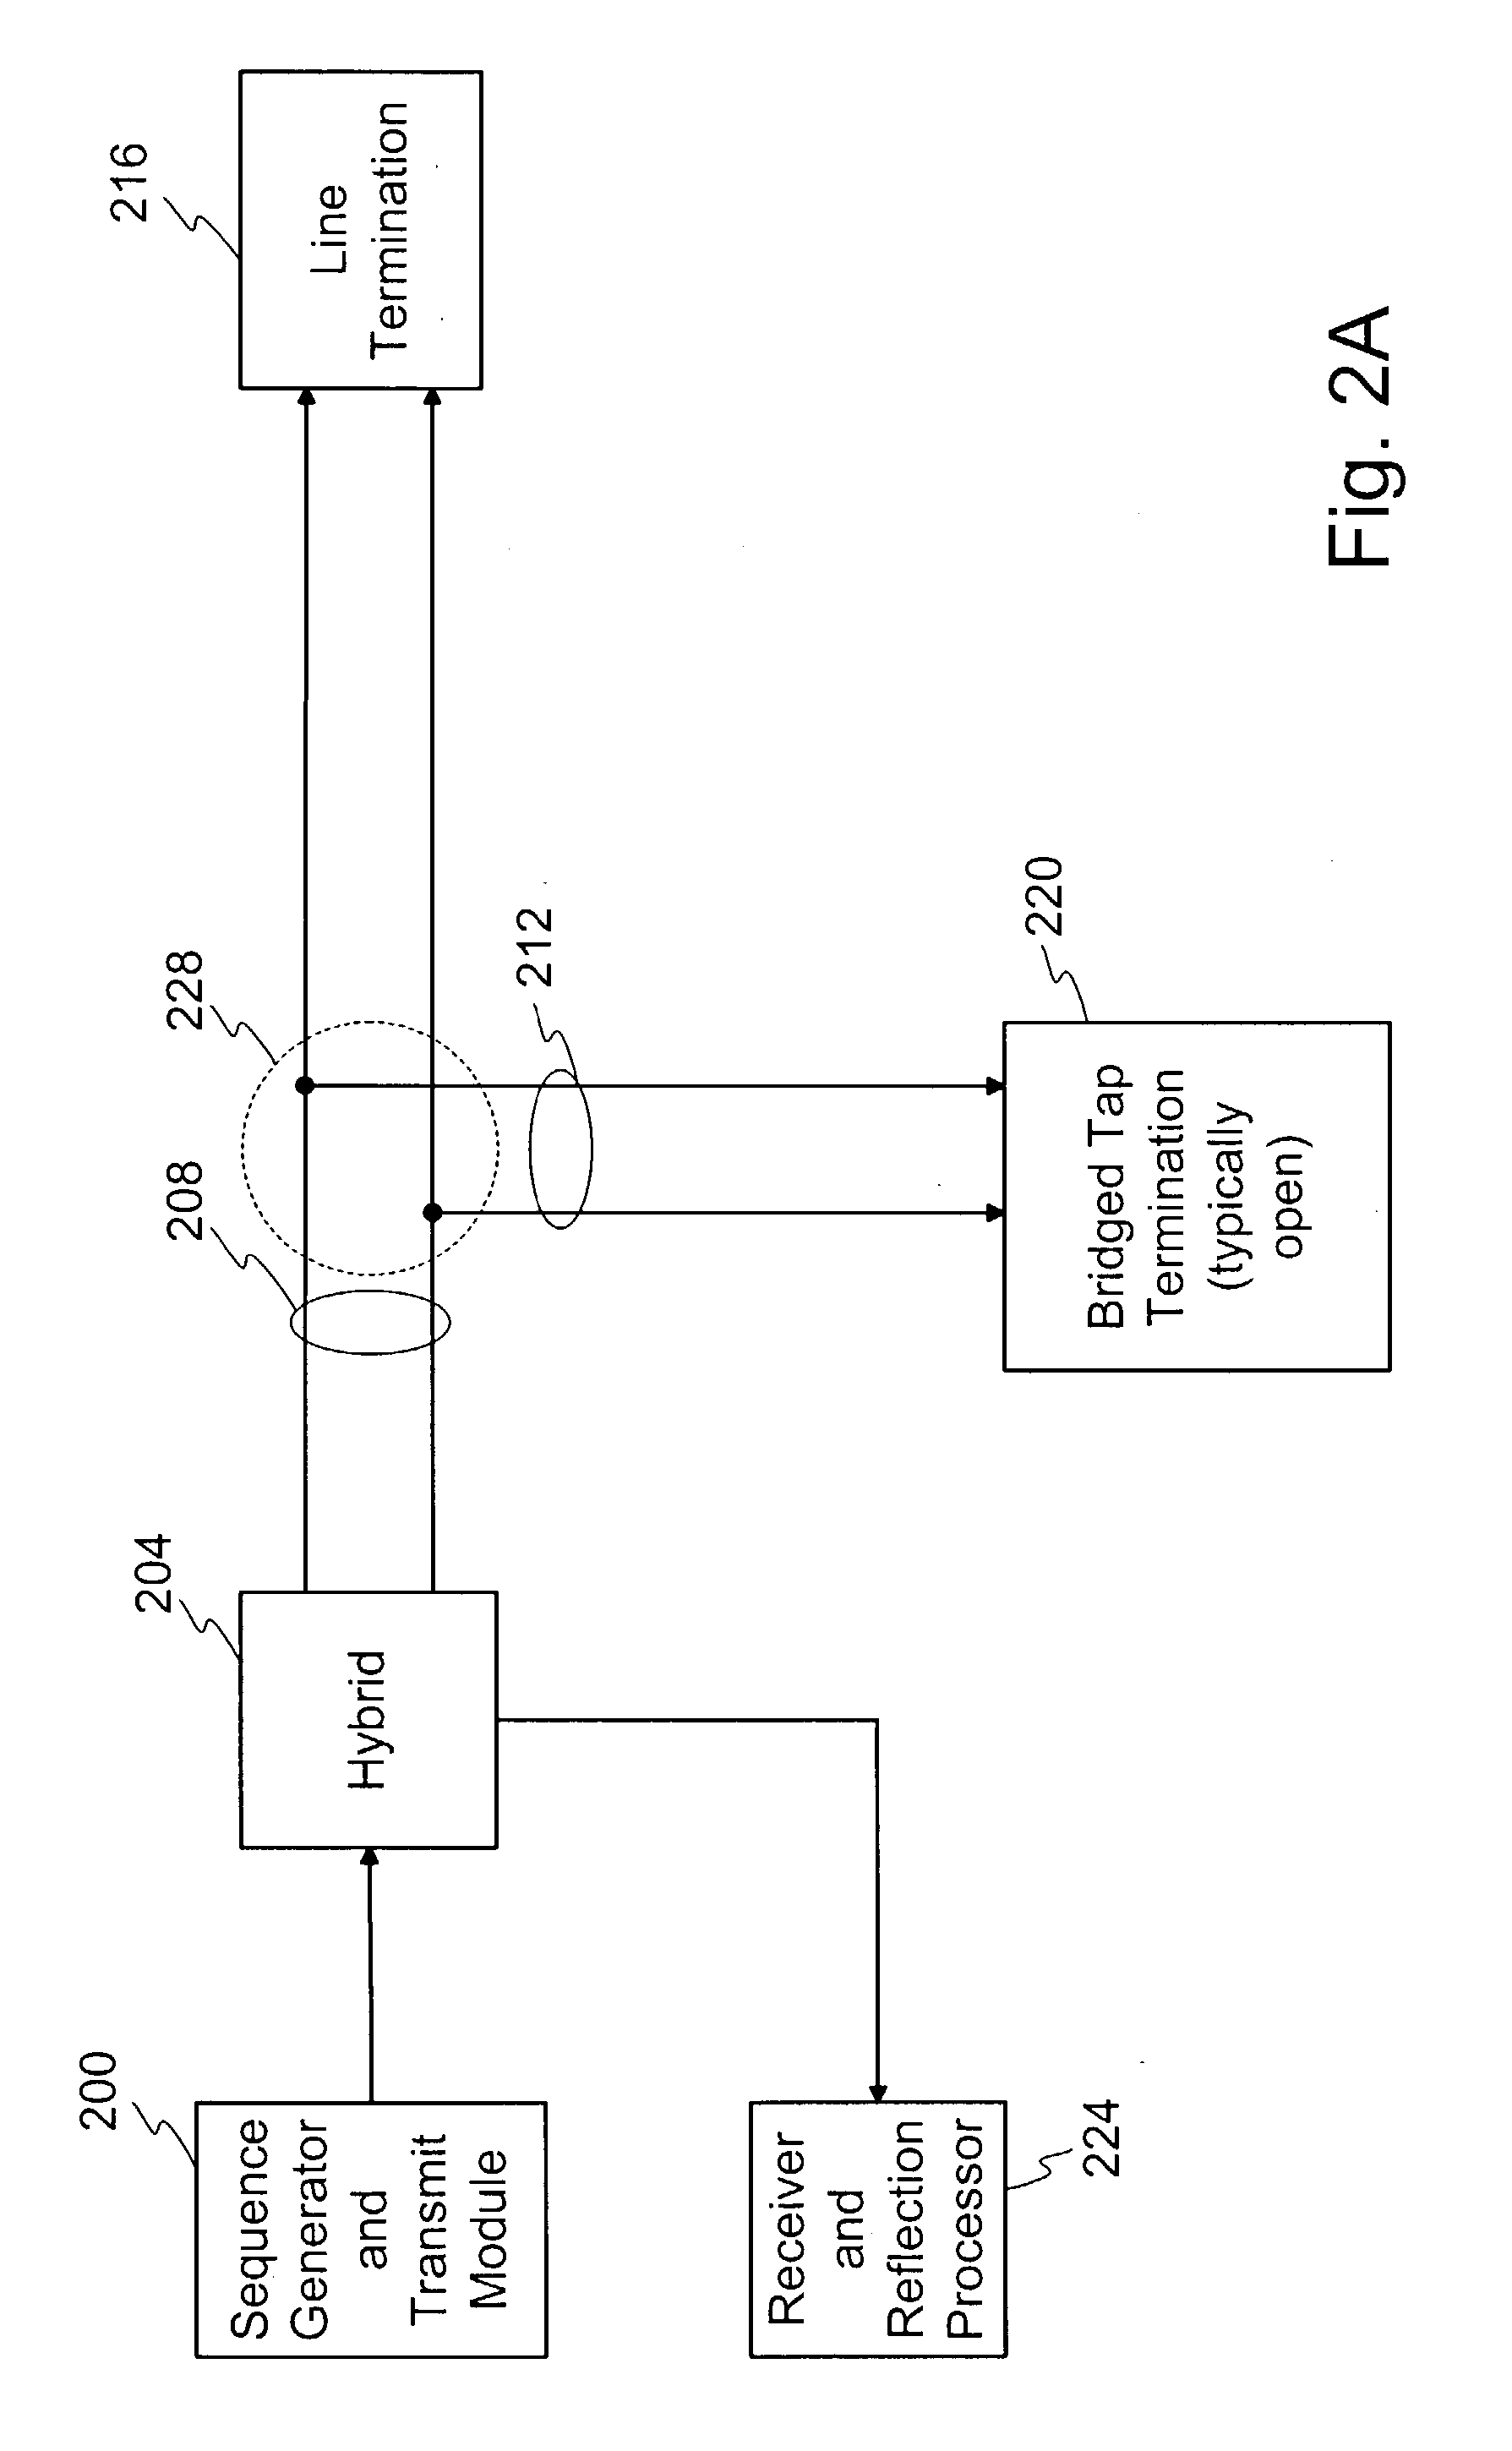 Optical sequence time domain reflectometry during data transmission